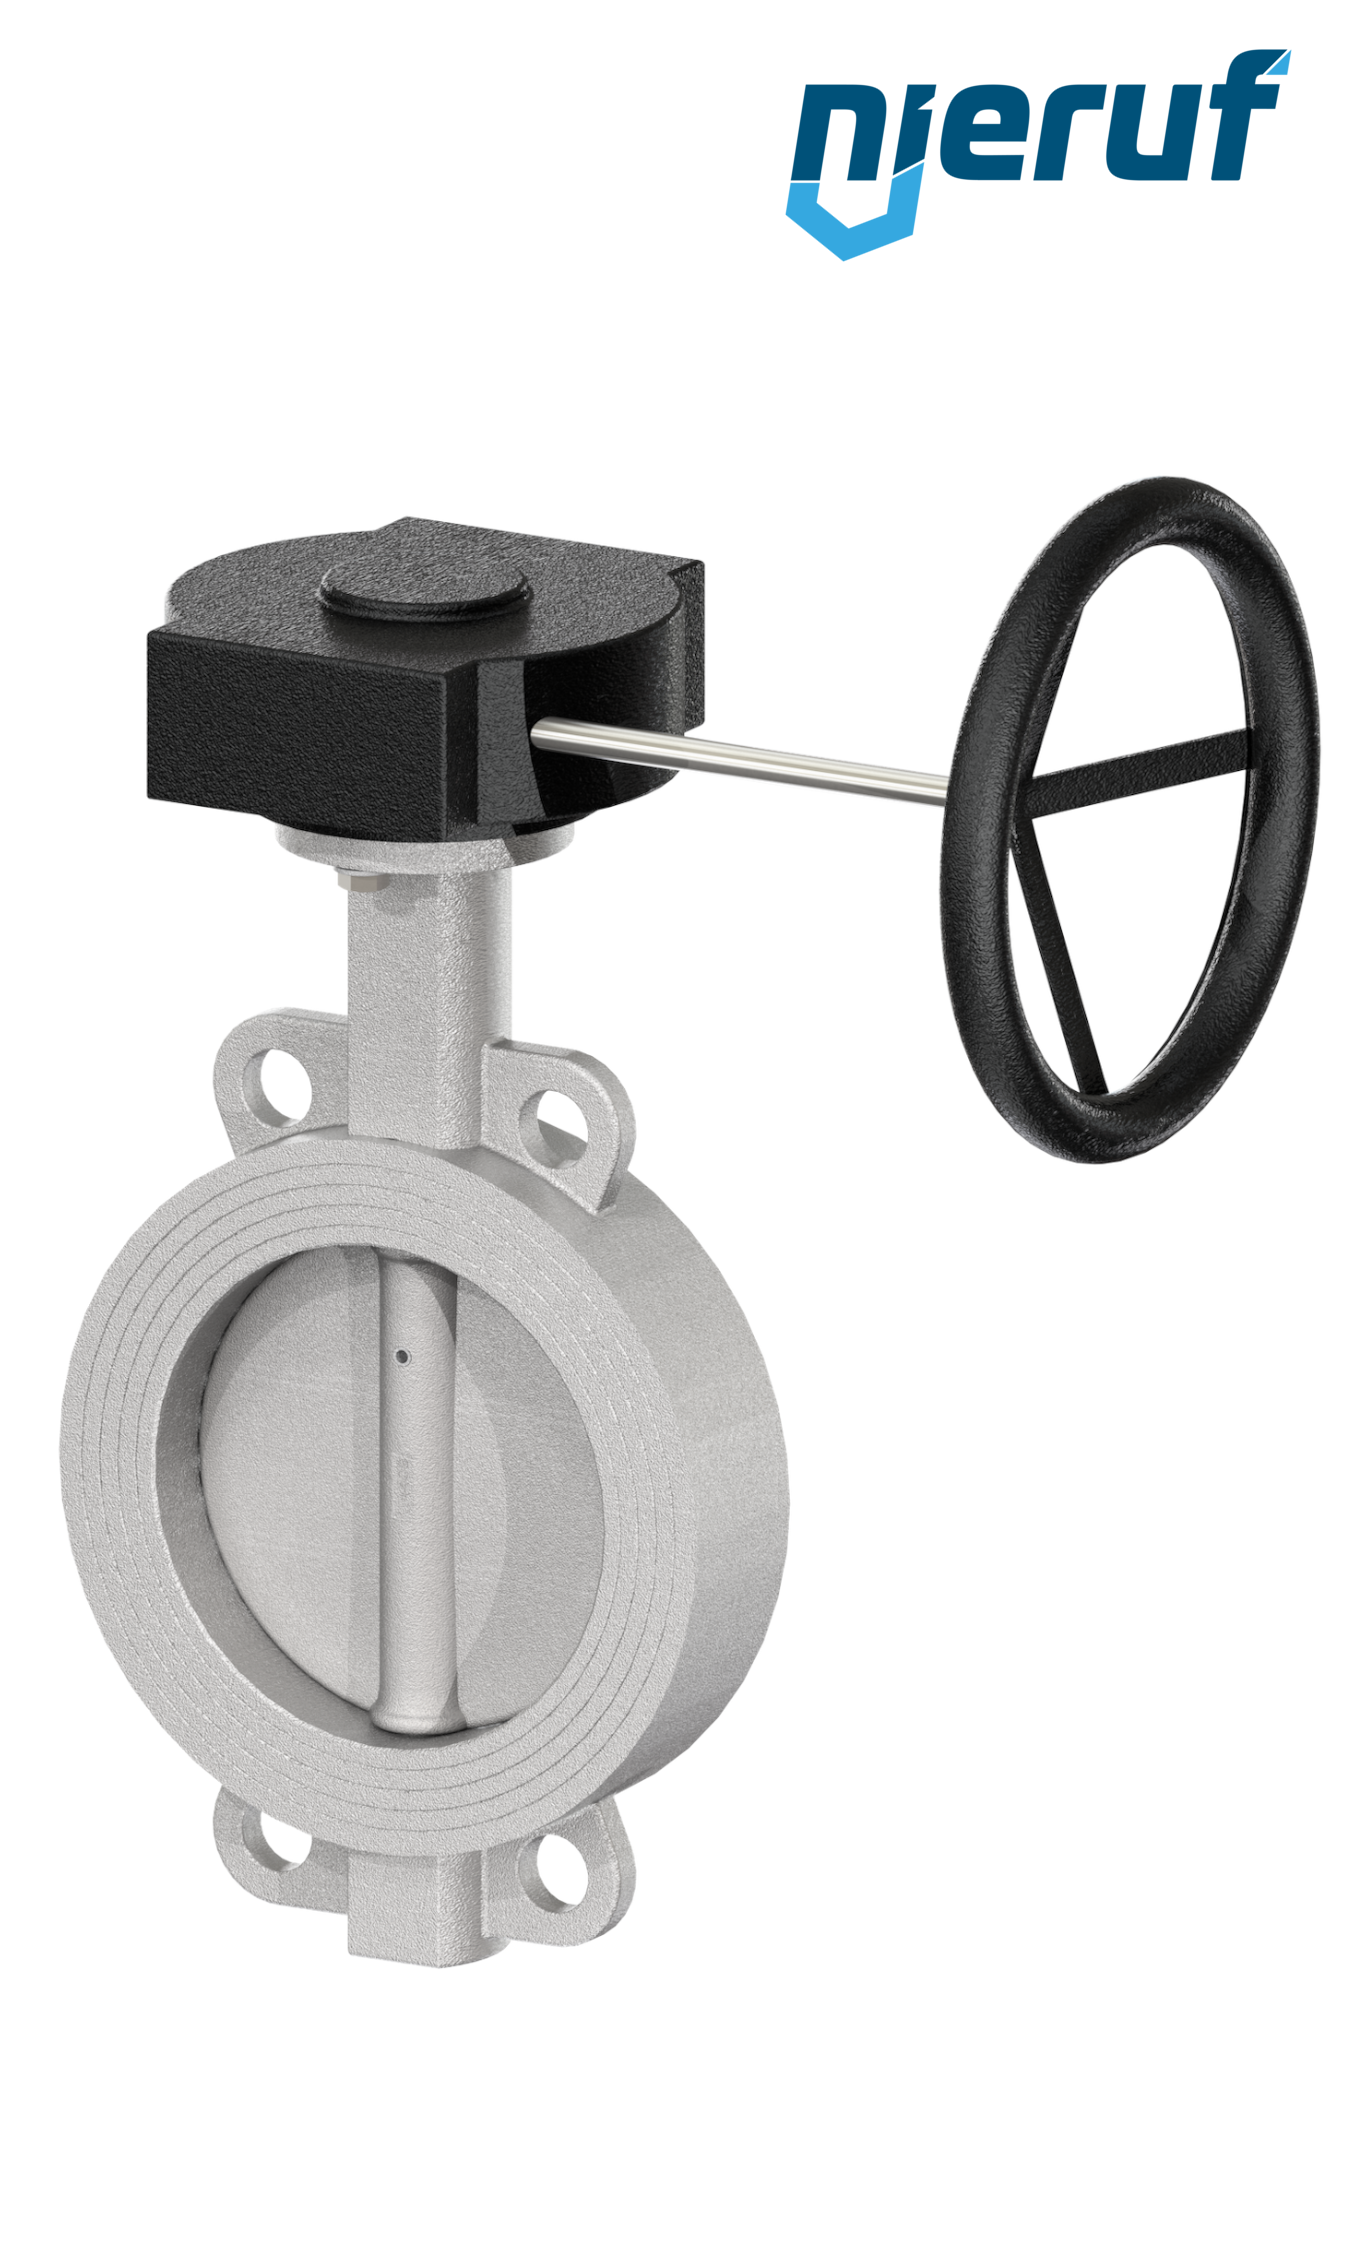 Butterfly-valve-stainless-steel DN 200 PN16 AK08 metall gearbox